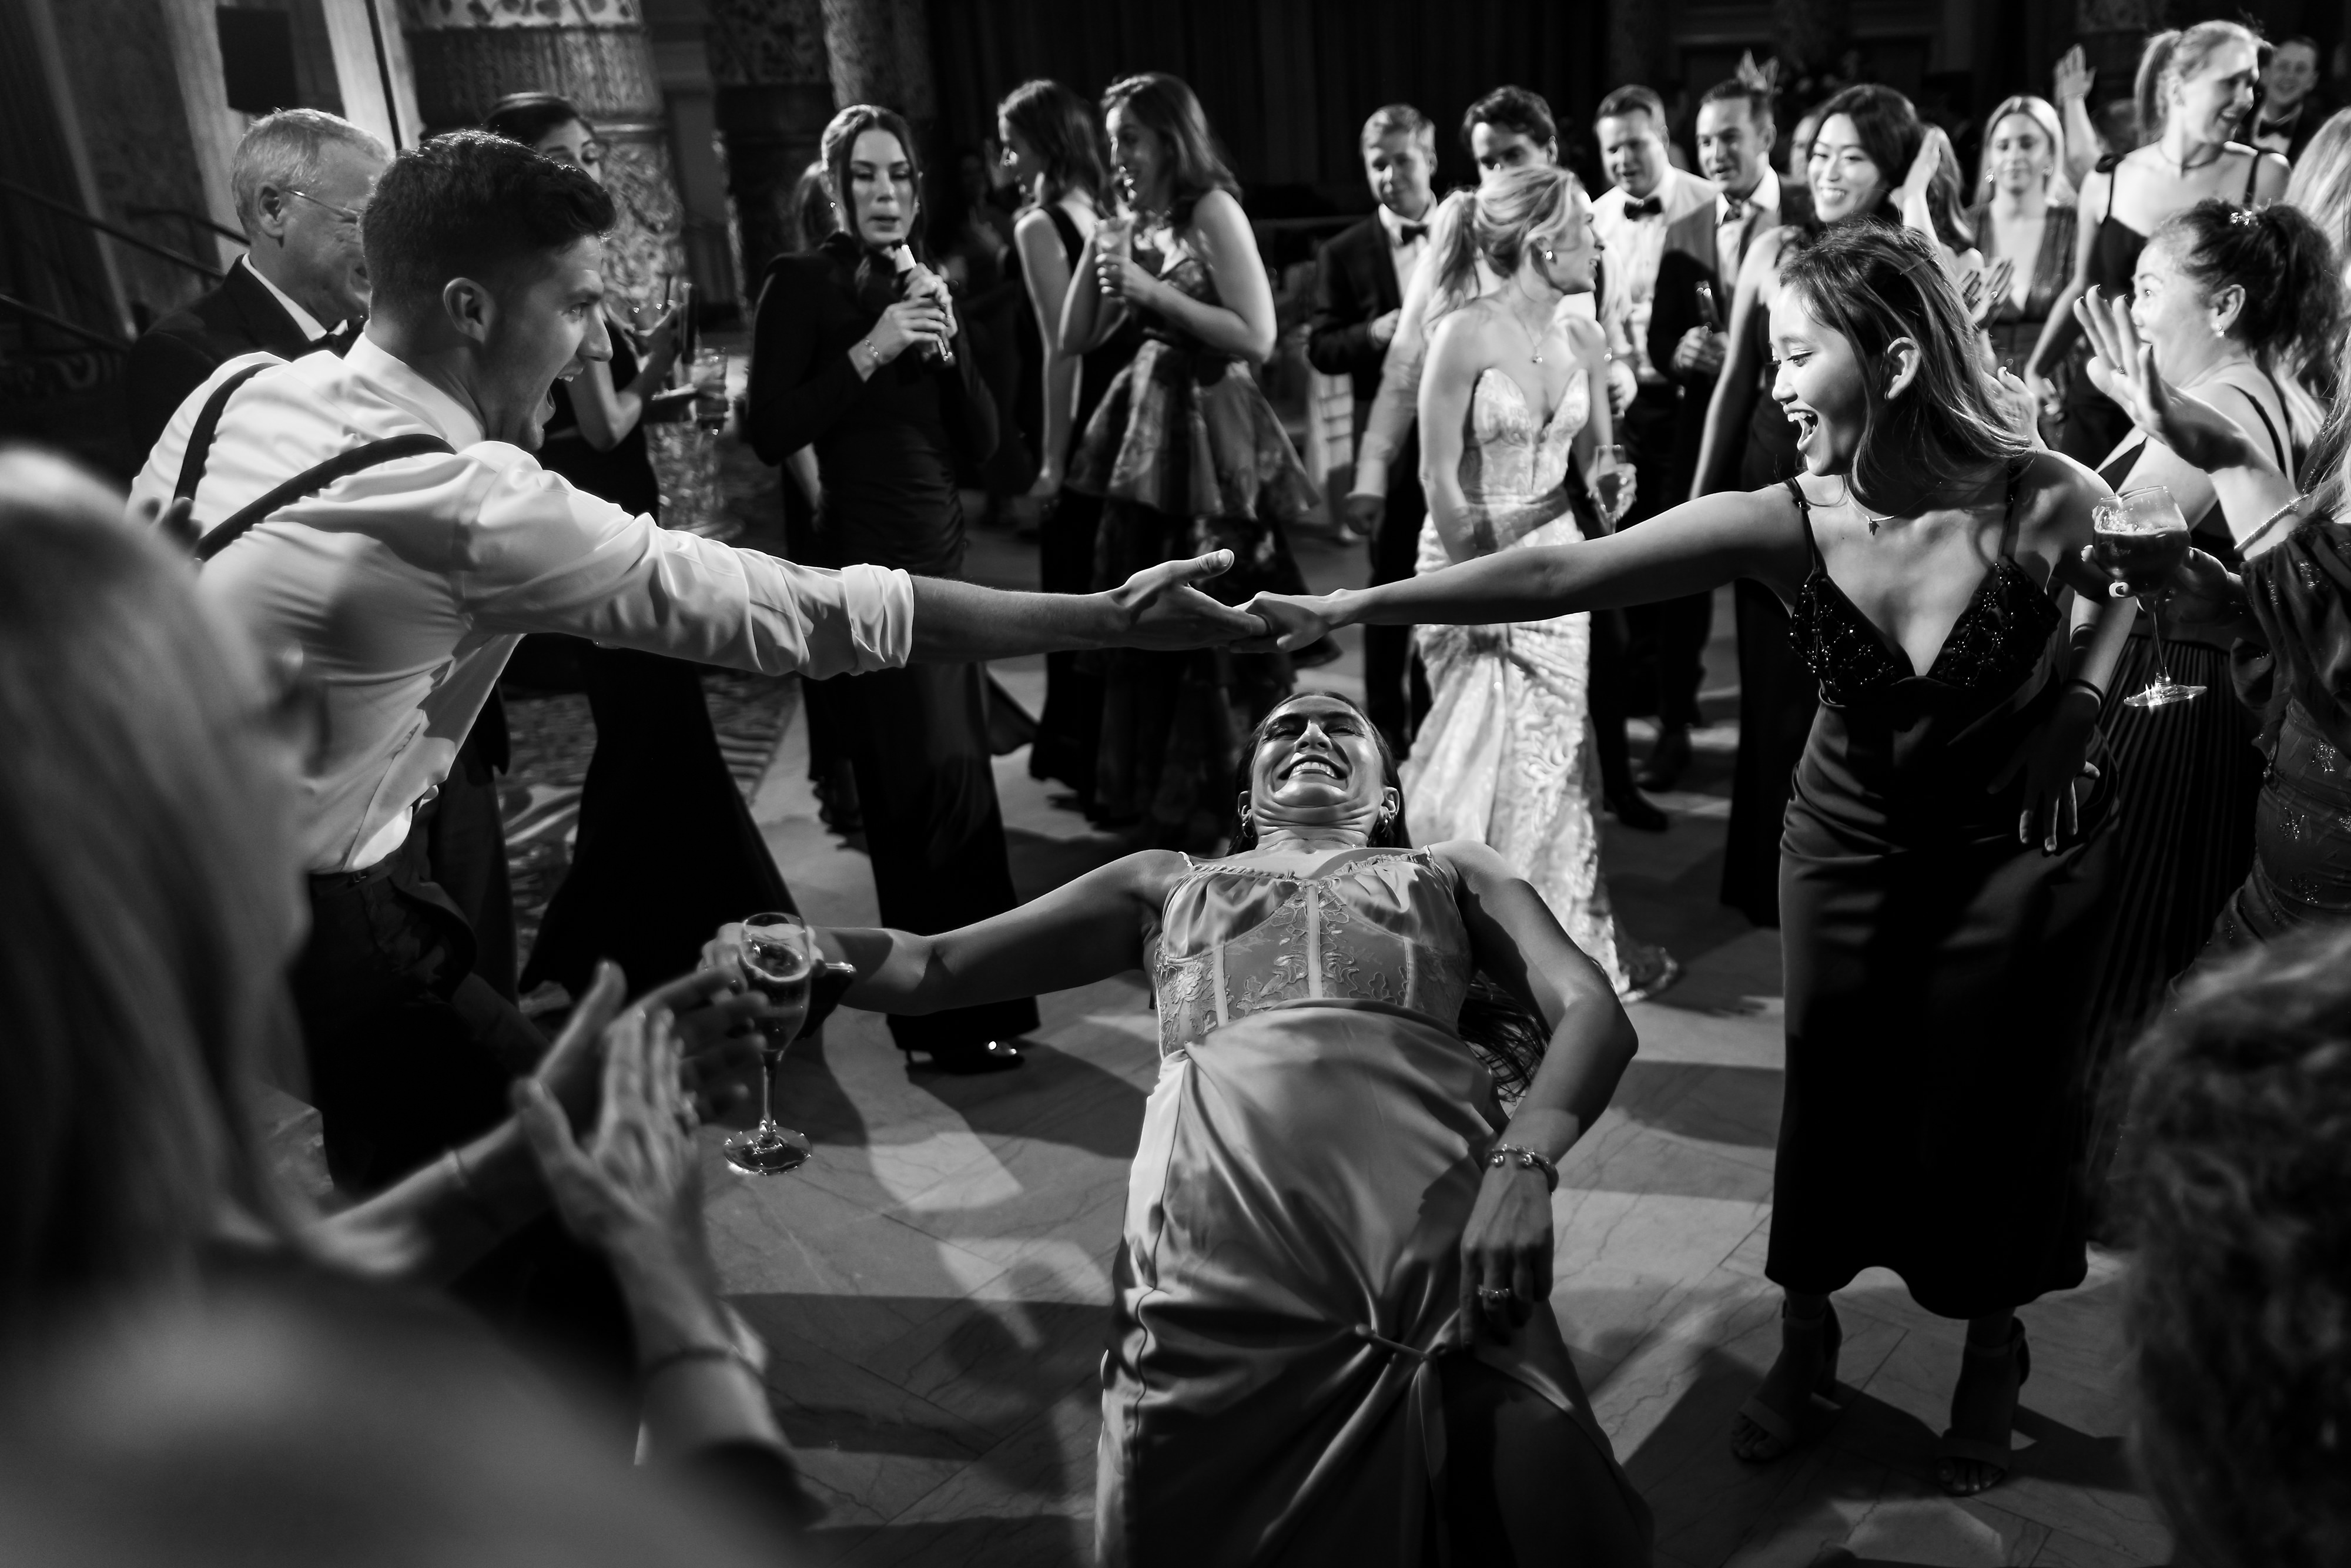 Wedding guests dance during wedding reception in the Grand Ballroom at The Drake Hotel in Chicago